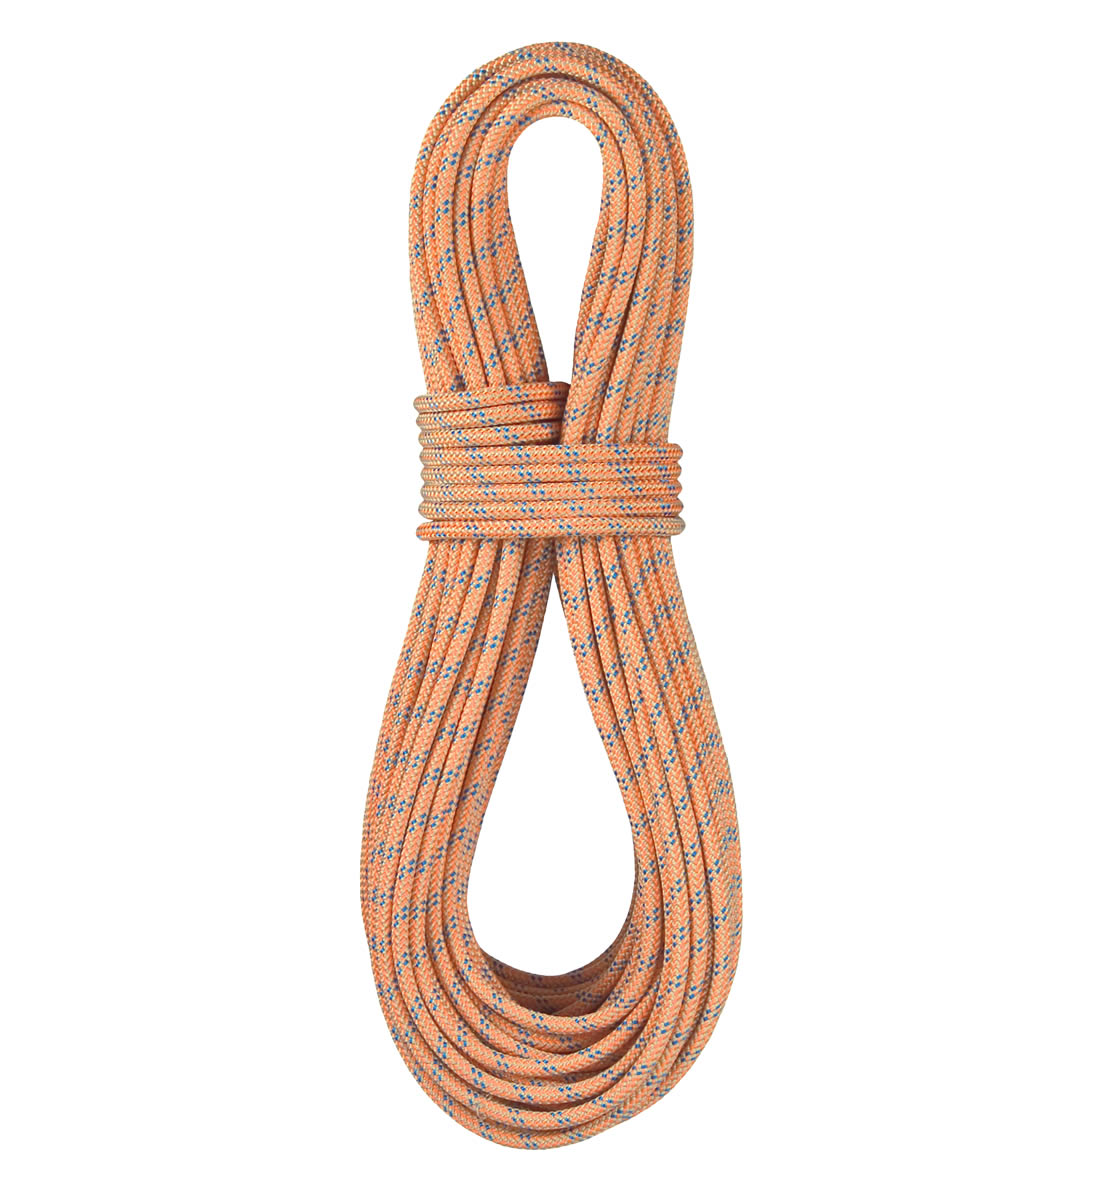 7mm VT PRUSIK - BlueWater Ropes | BlueWater Ropes